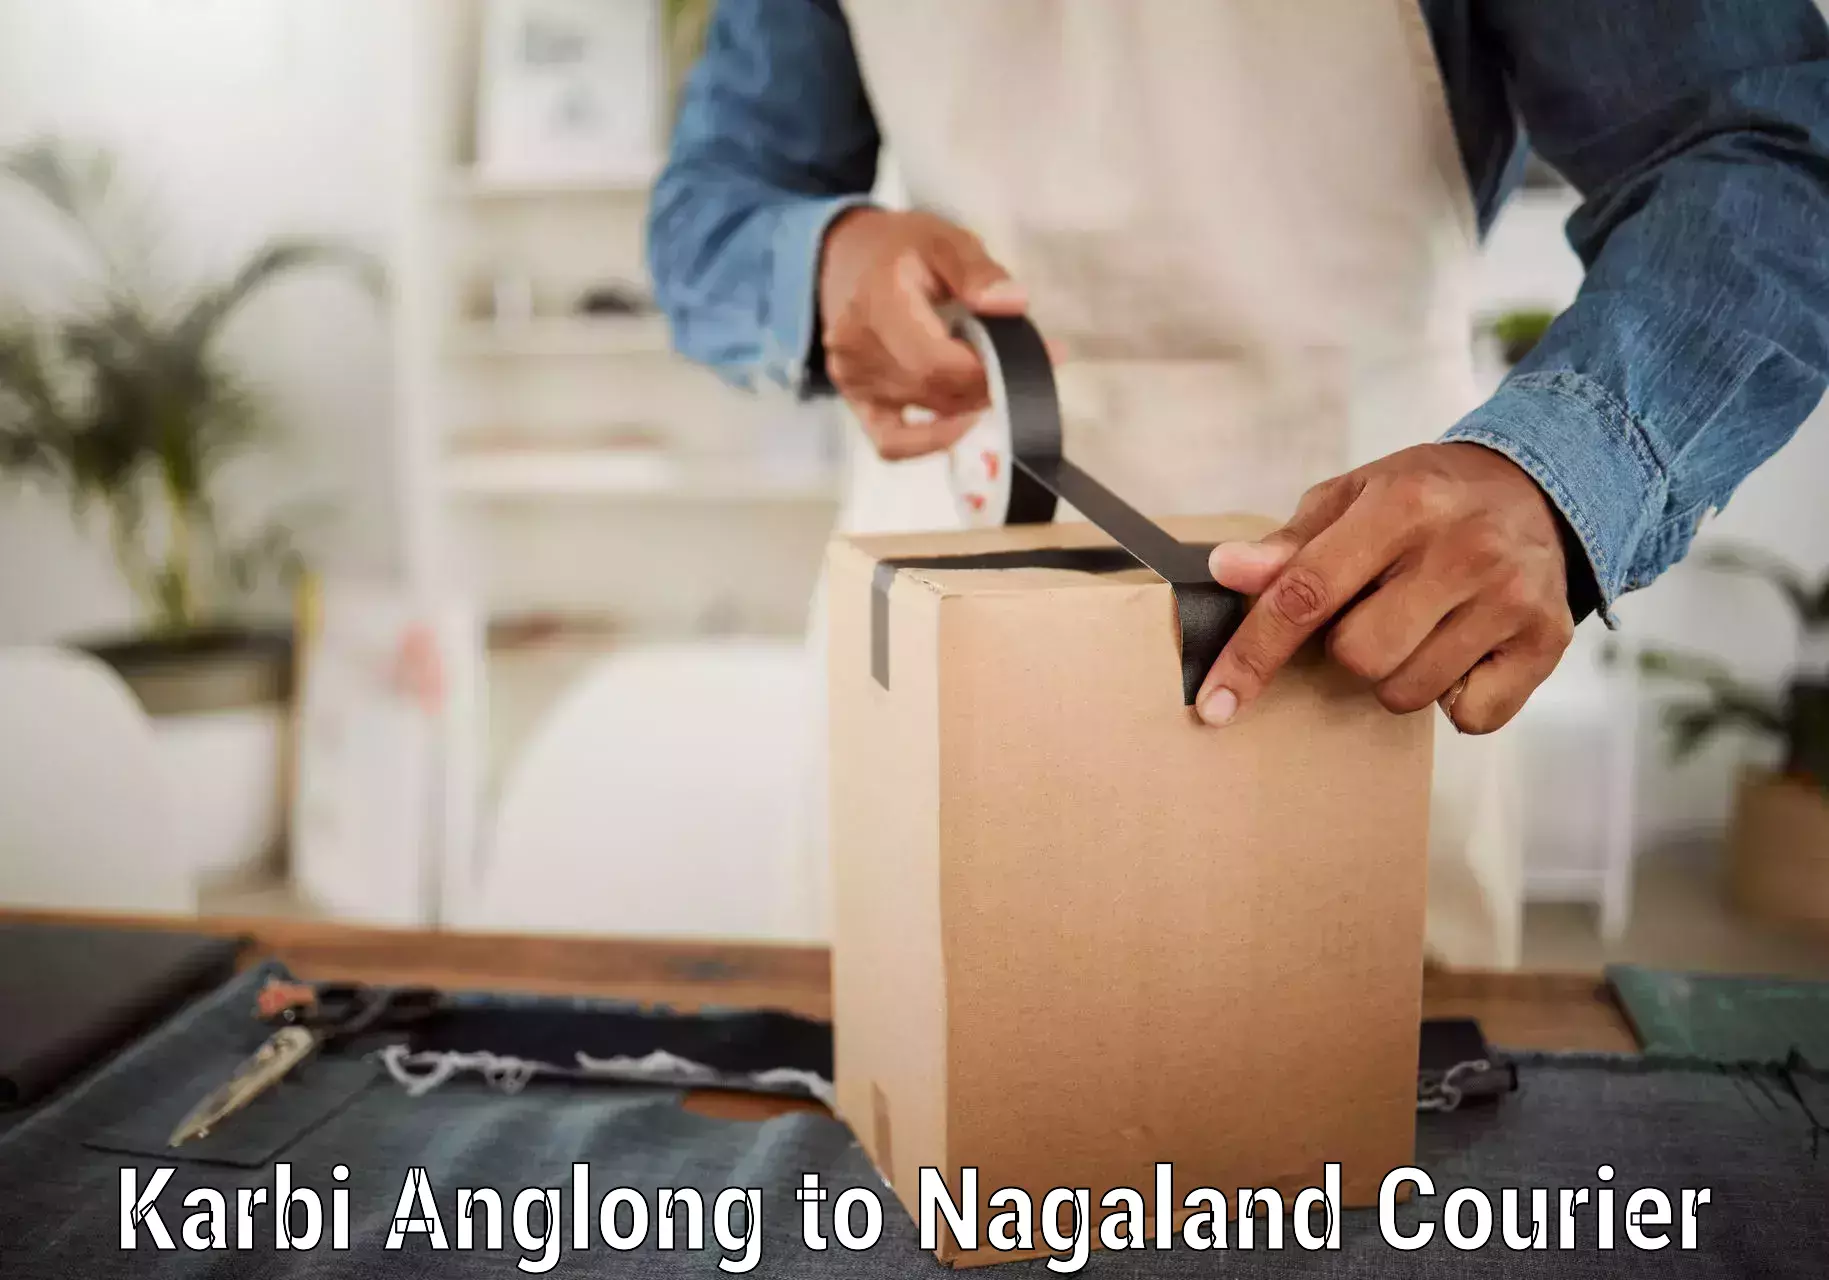 Nationwide delivery network Karbi Anglong to Nagaland